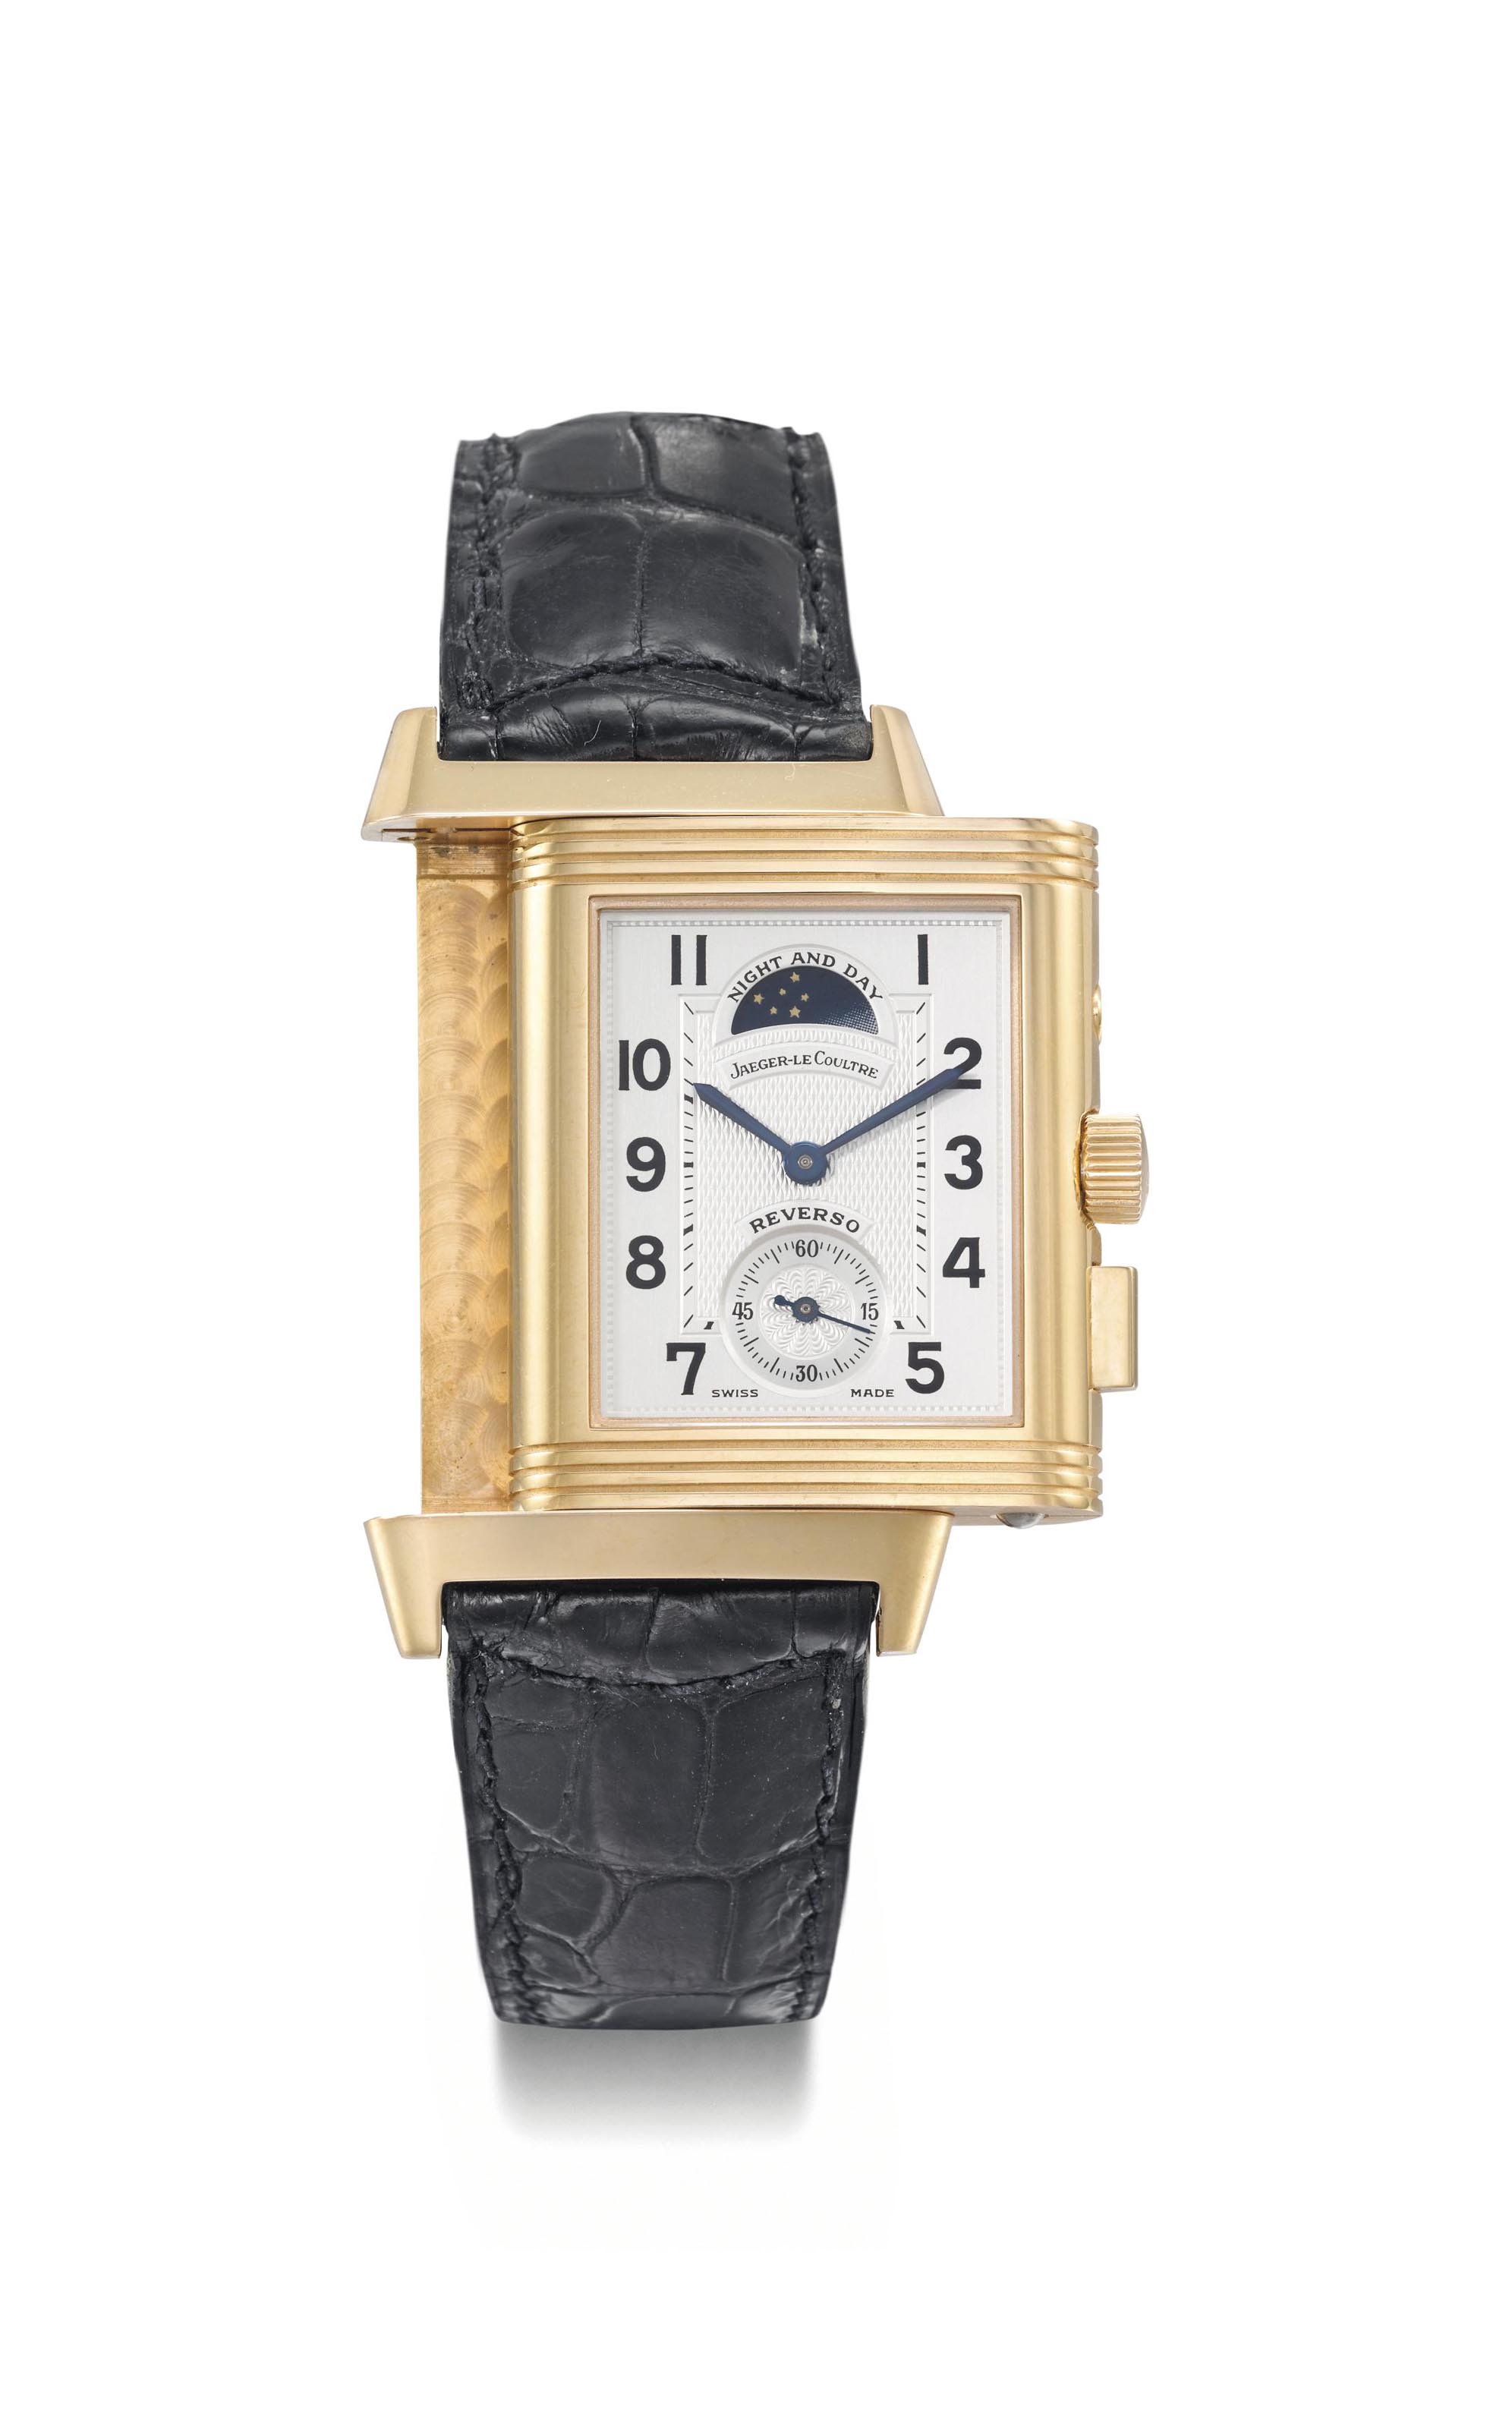 Reverso Geographic in Rose Gold On Black Alligator Leather Strap with Silver/Black Dial